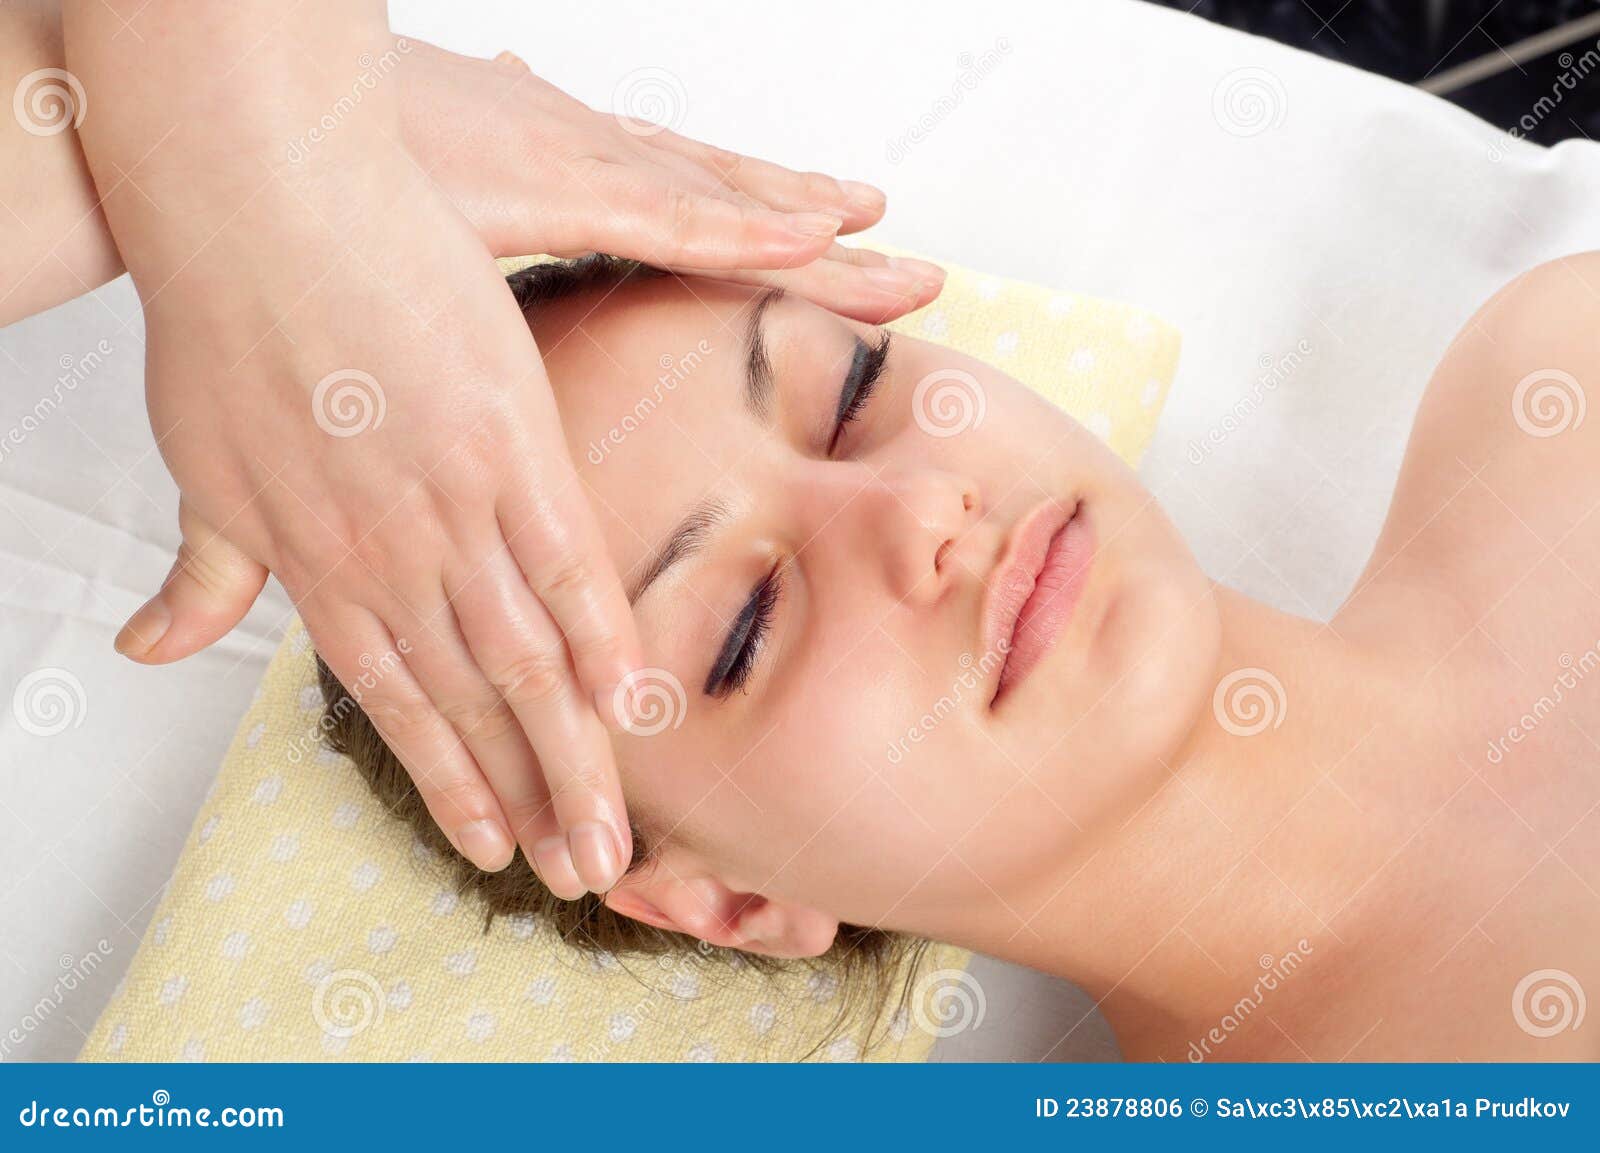 Beautiful Young Women Getting A Face Massage Royalty Free Stock Image Image 23878806